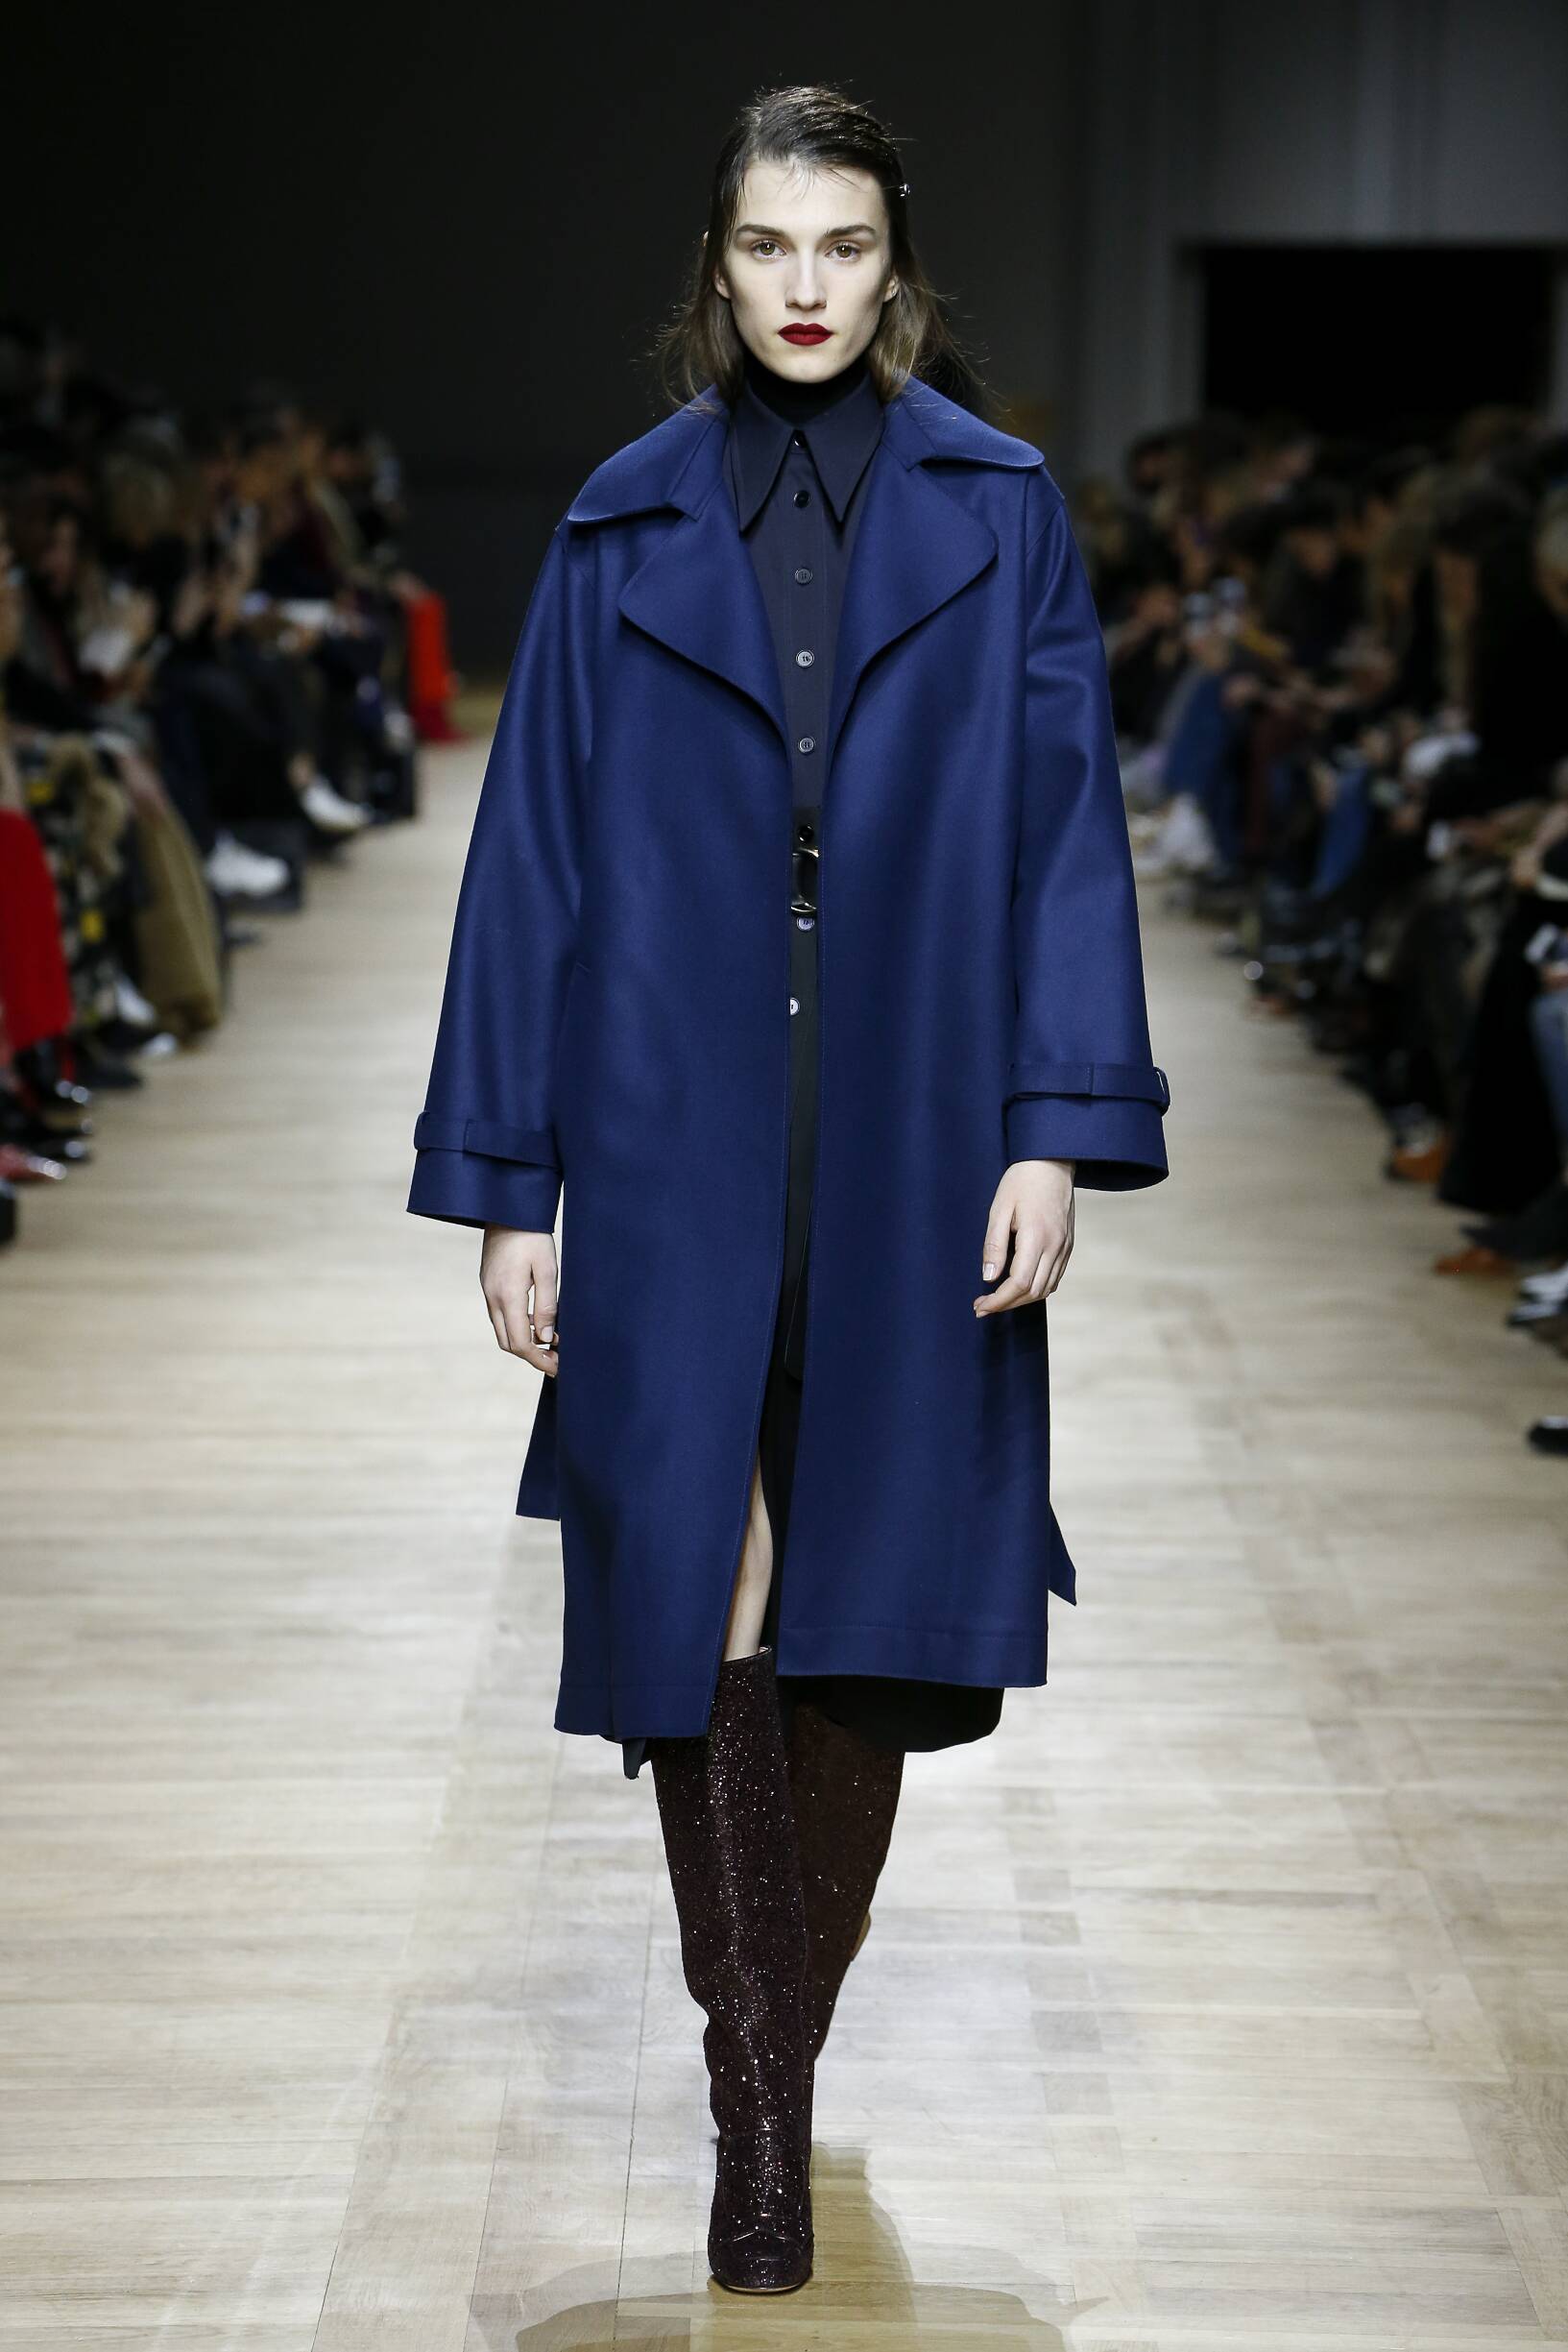 ROCHAS FALL WINTER 2018 WOMEN'S COLLECTION | The Skinny Beep